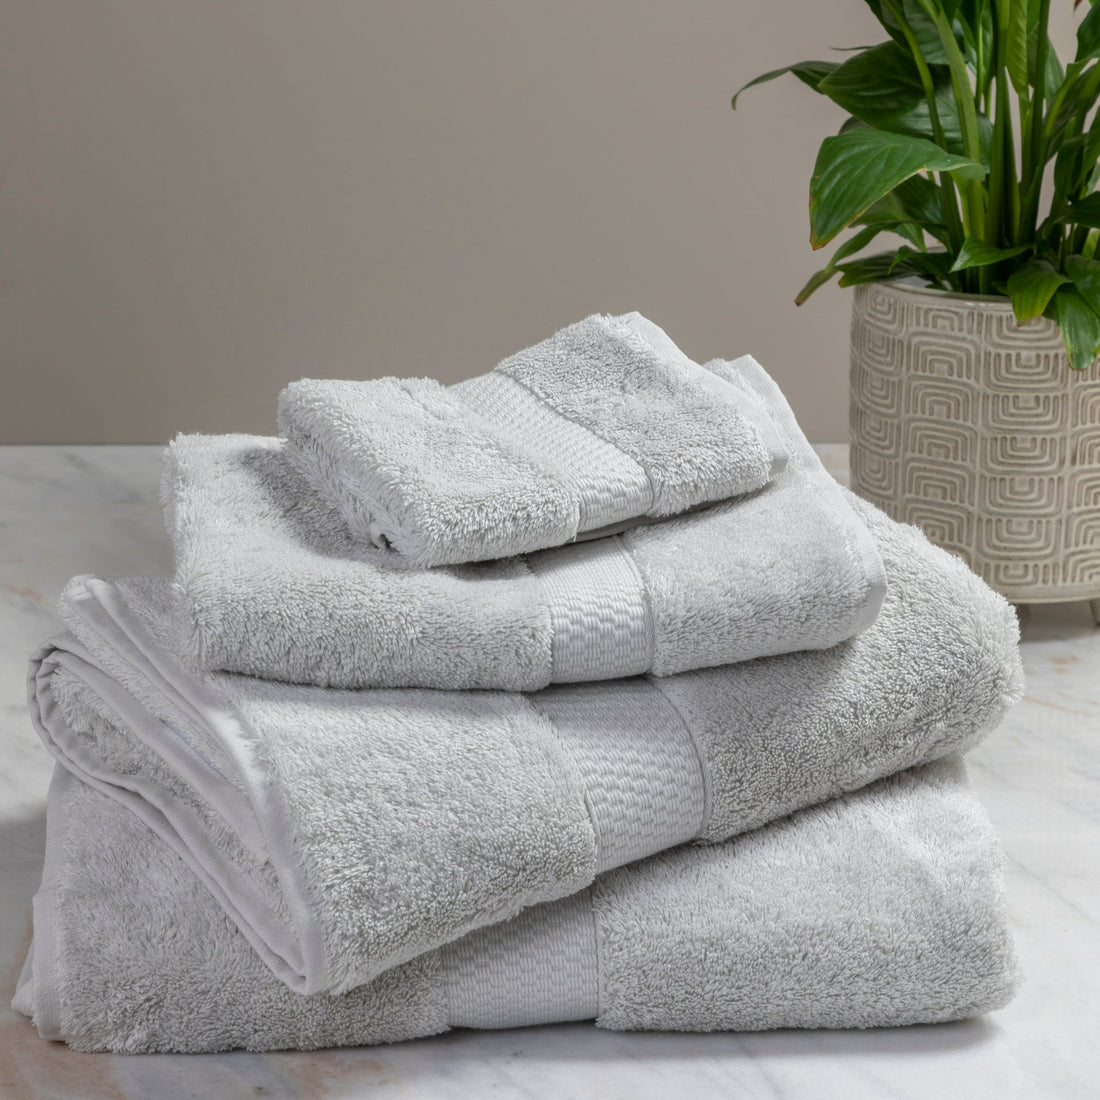 Oasis Hand Towel in Charcoal